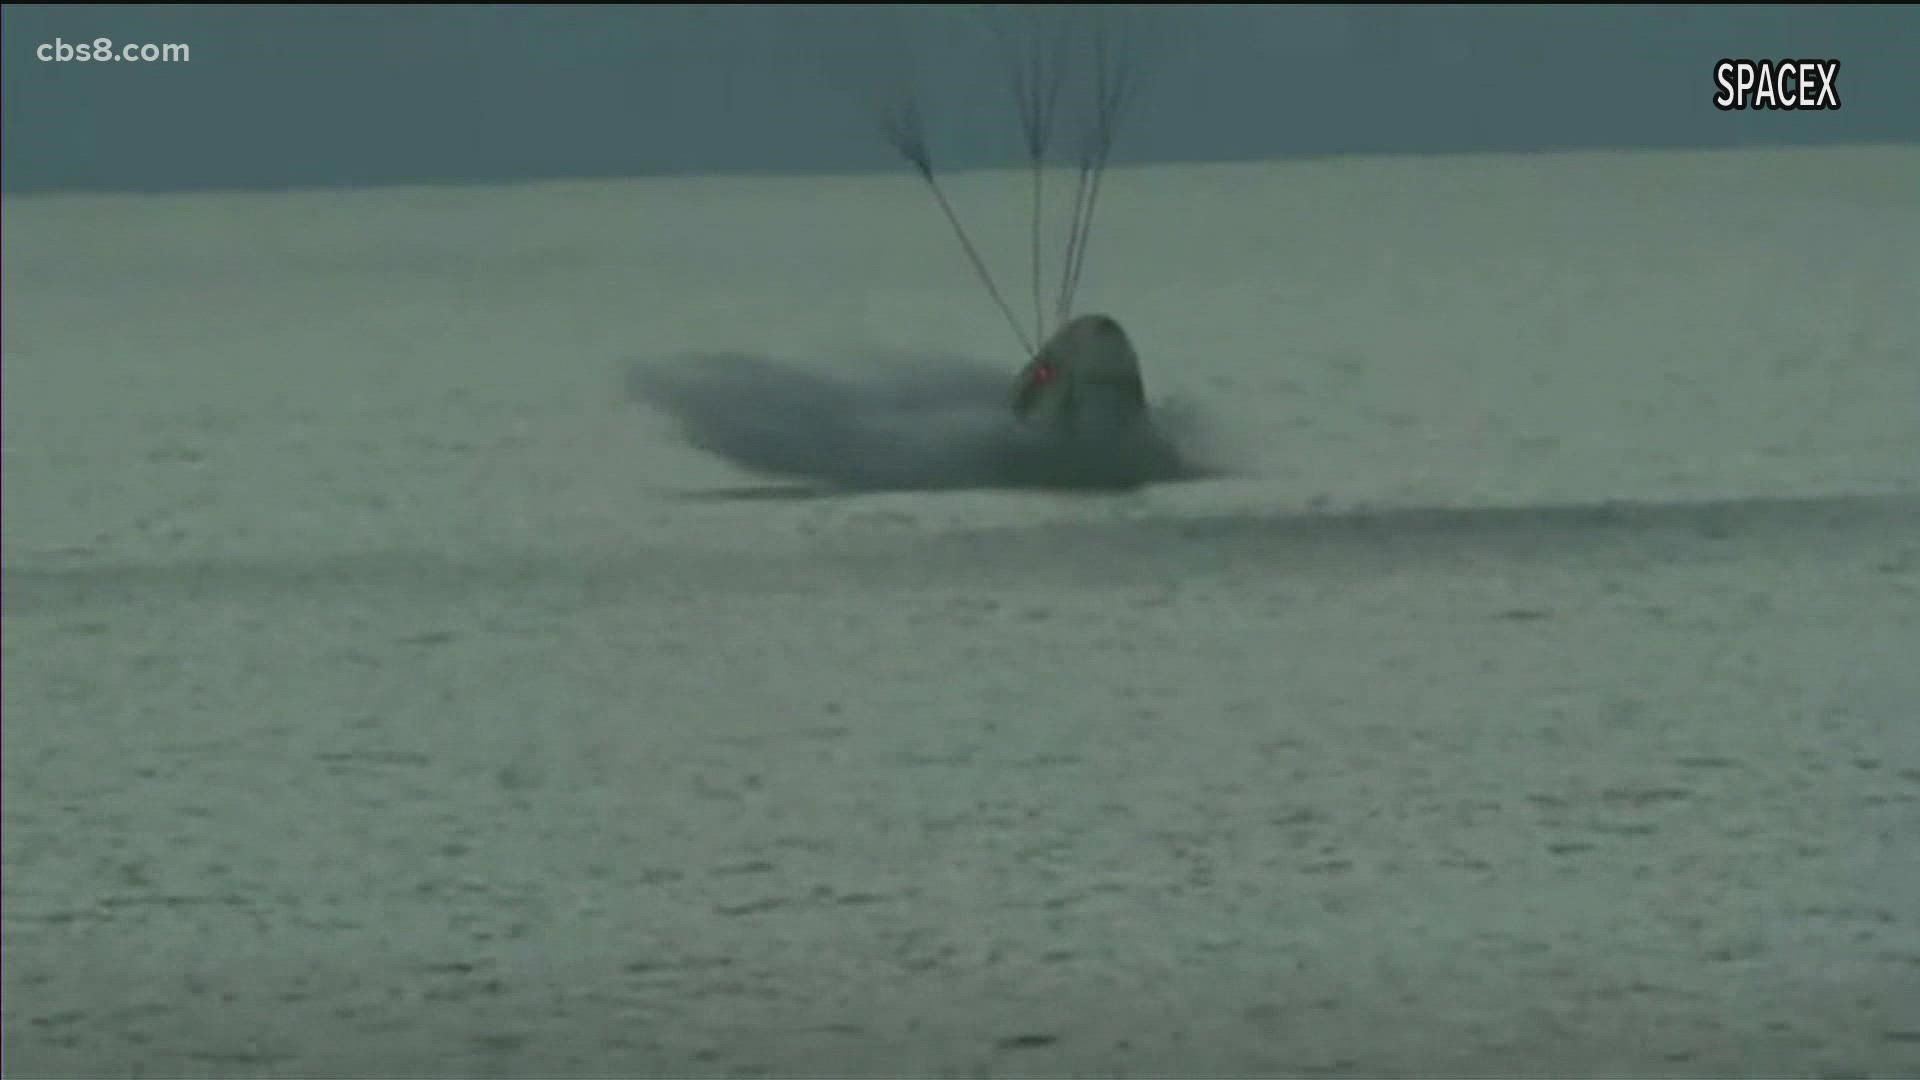 The recent Space-X mission sent four non-astronauts into space from the Kennedy Space Center, and after a few days in orbit, they made a splashdown landing Saturday.